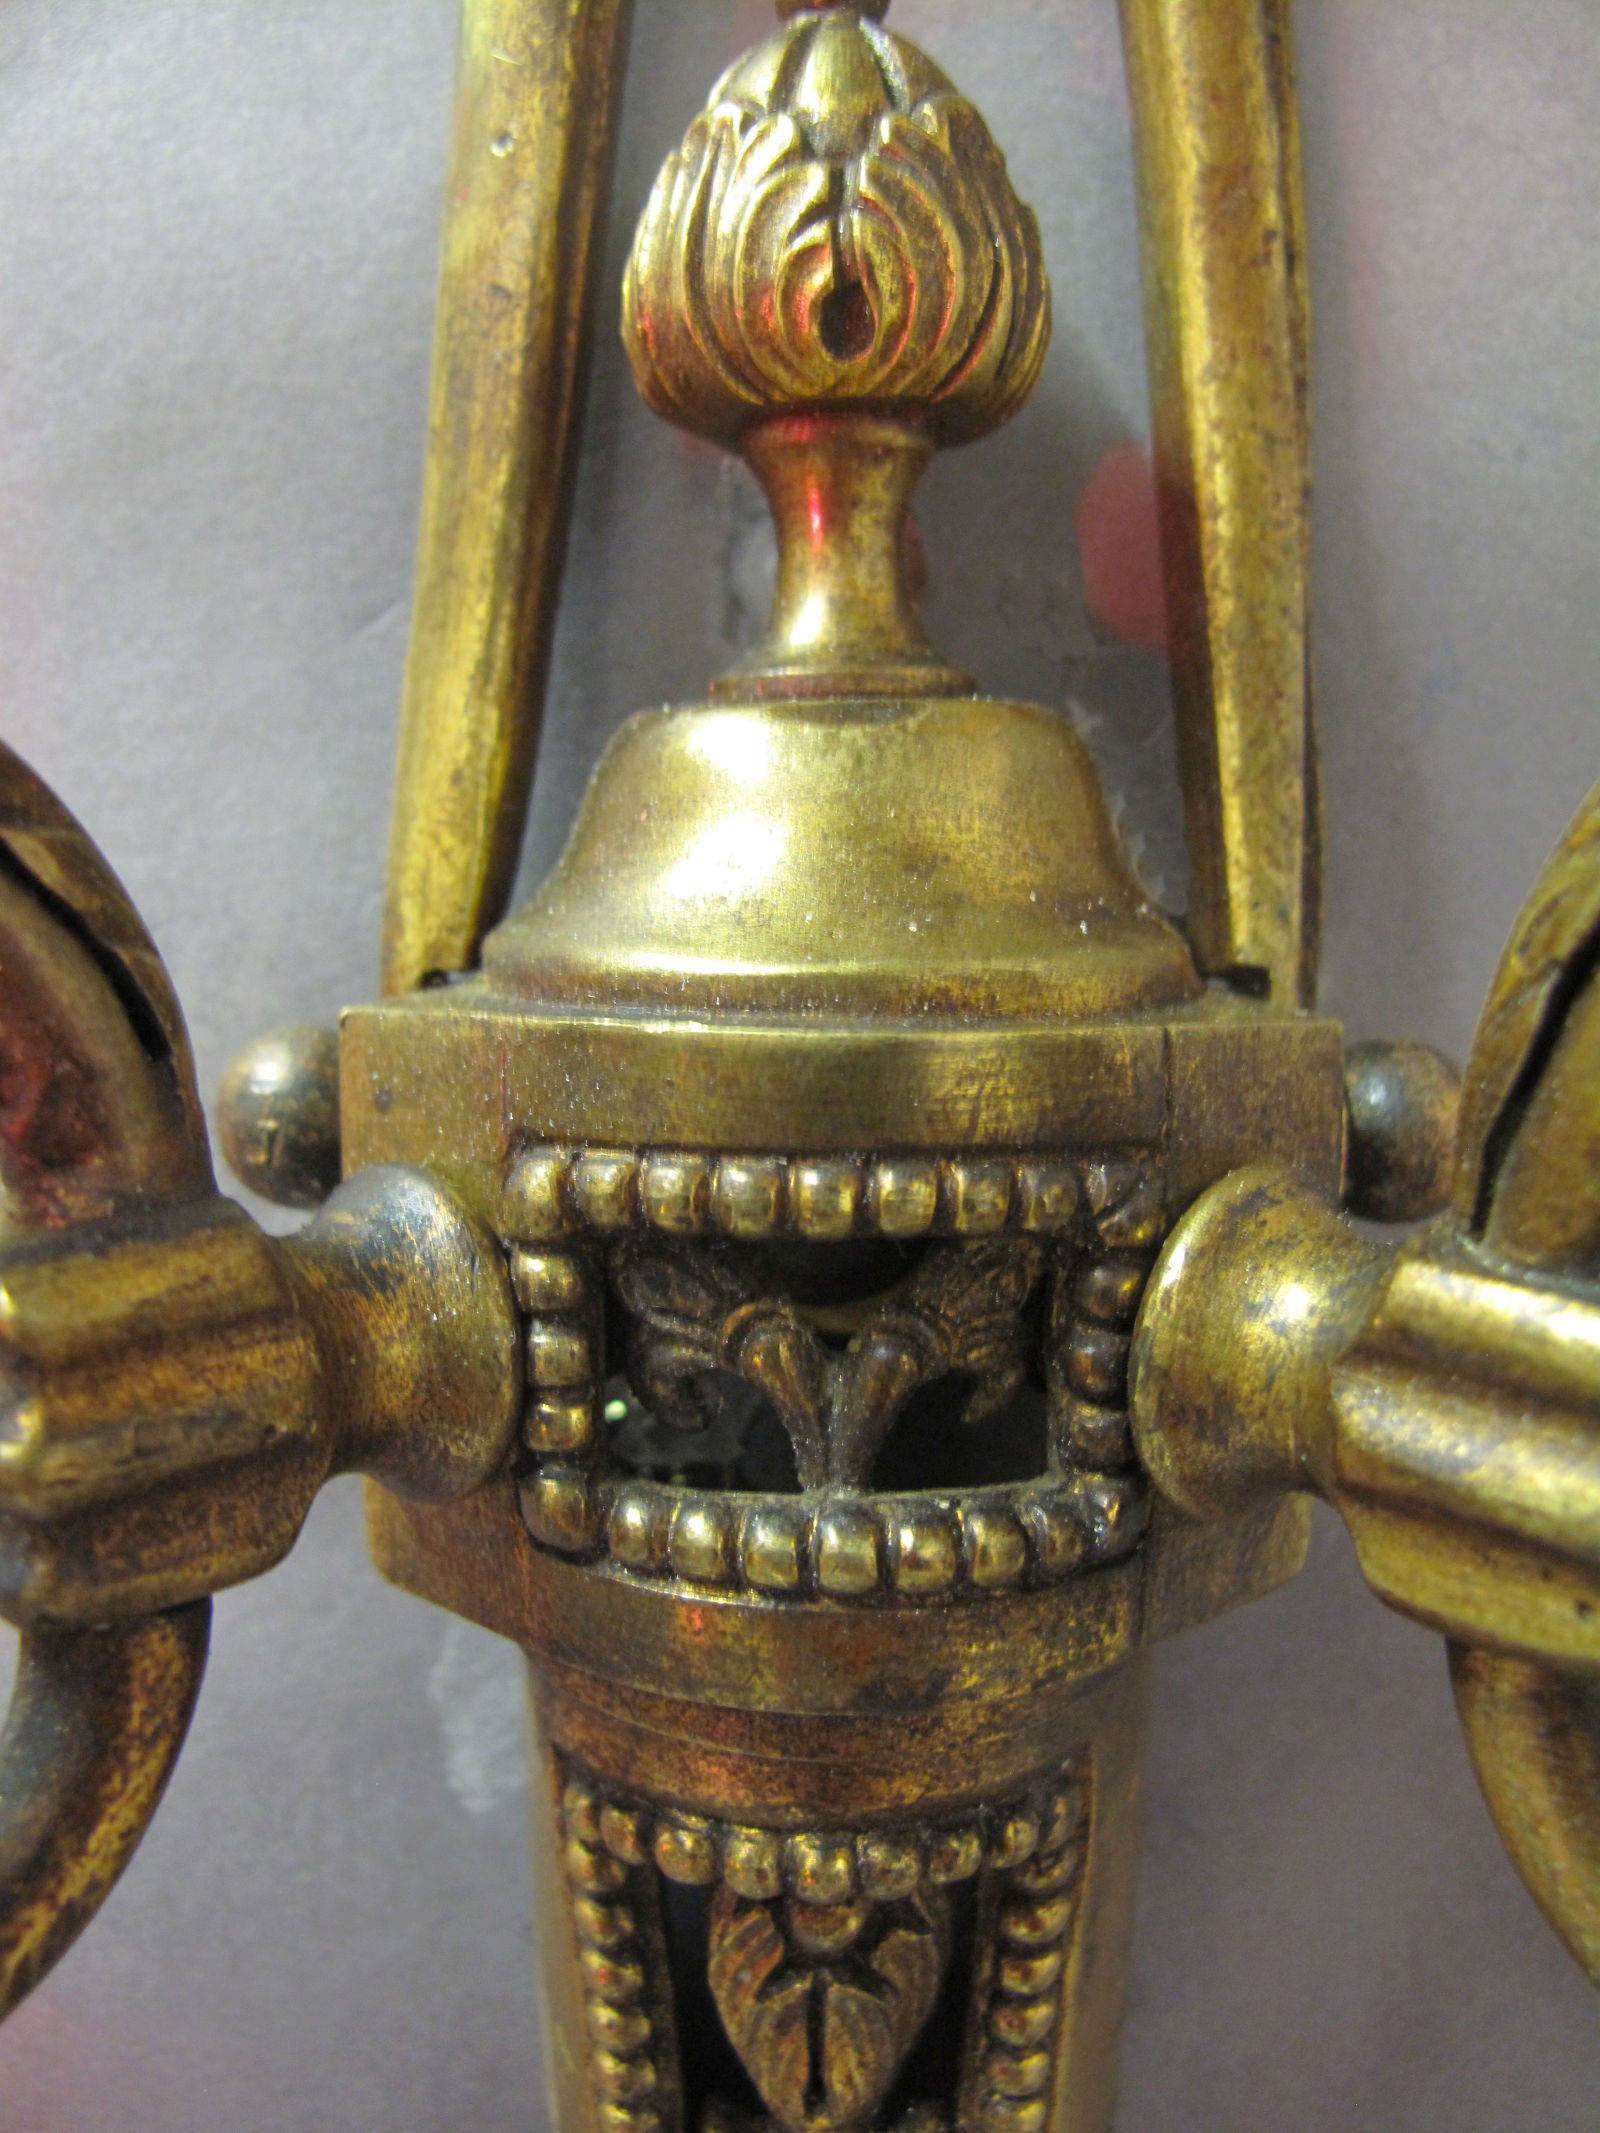 close up view of intricate brass casting